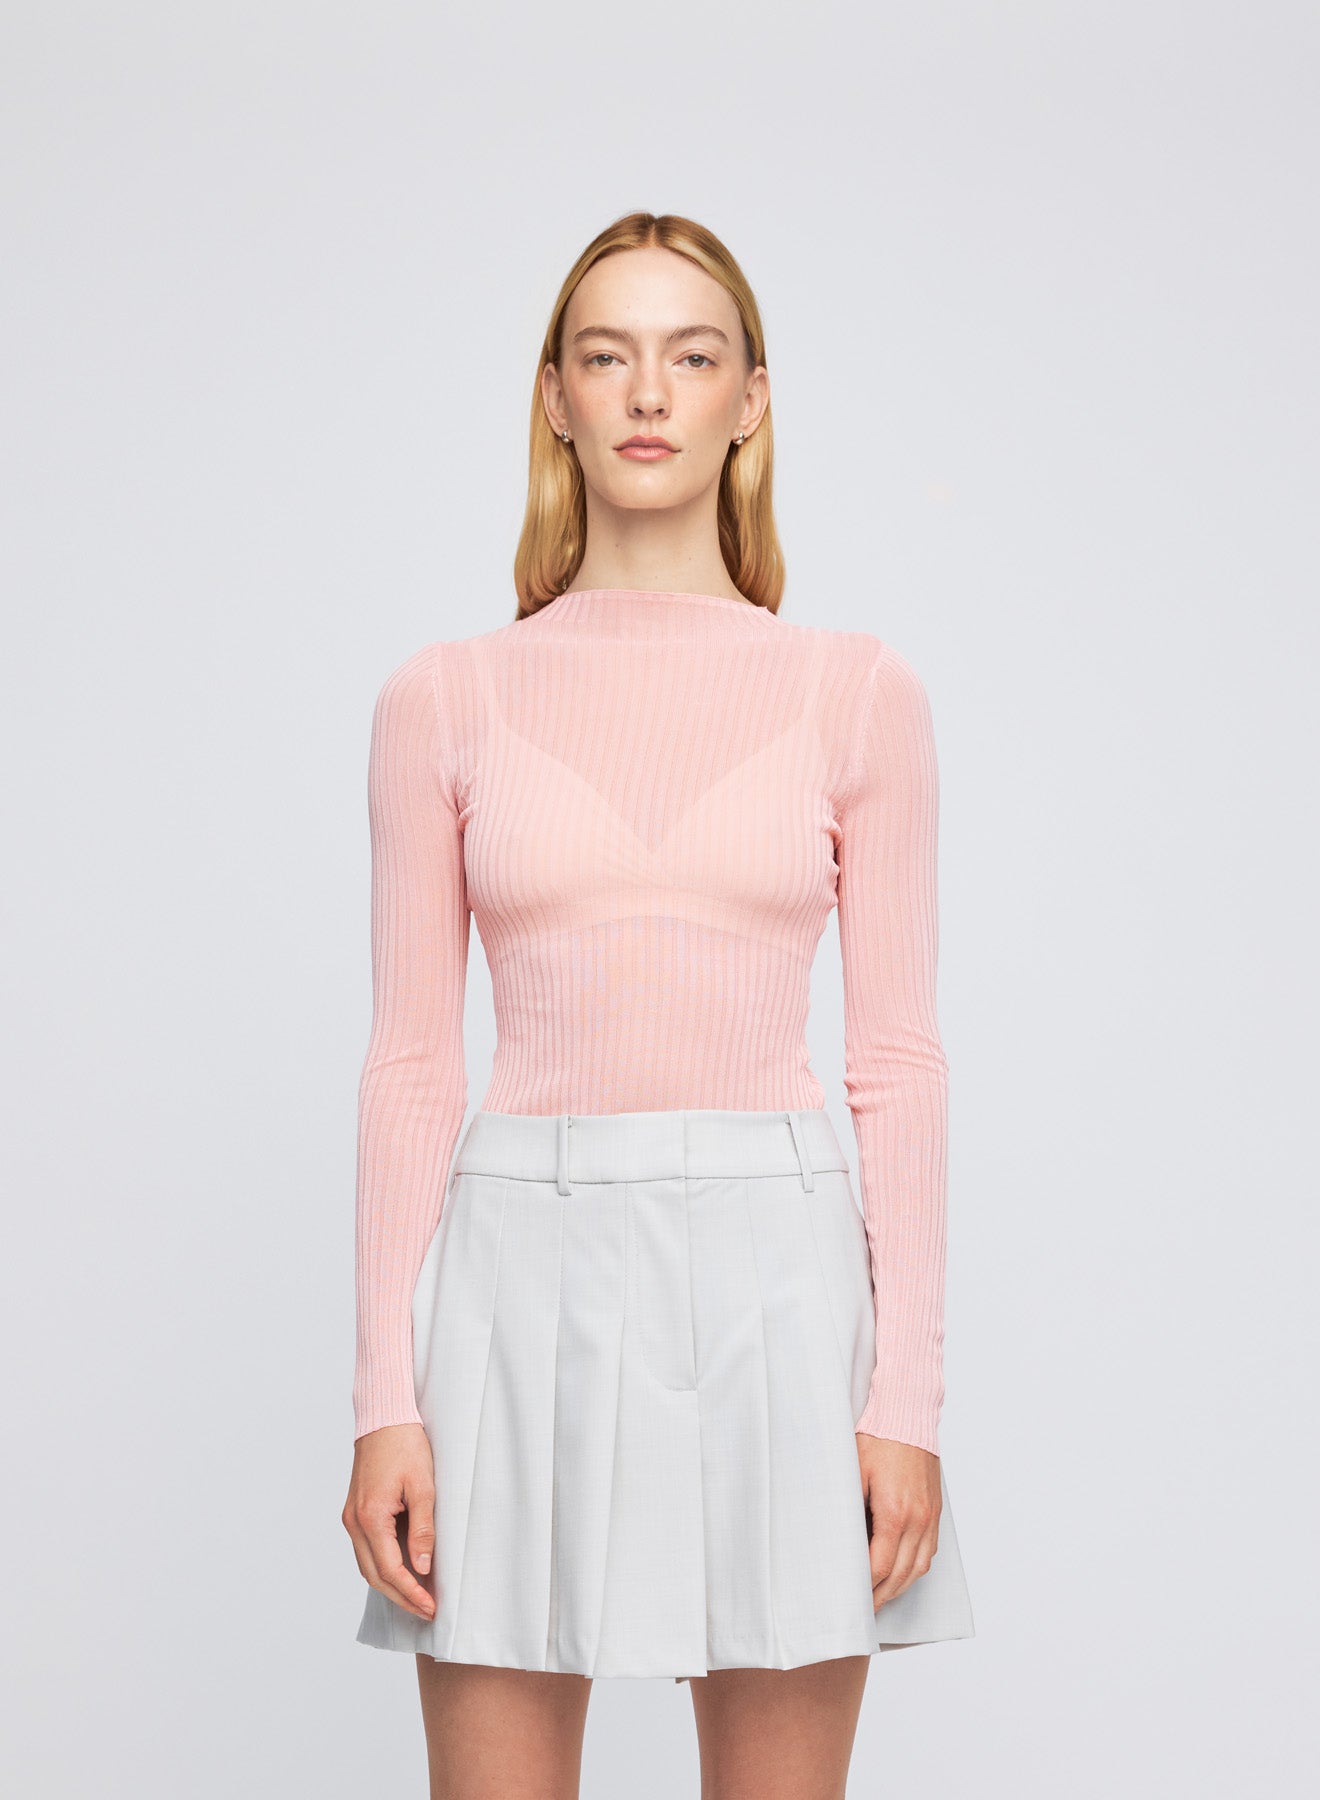 The ANNA QUAN Tatum Top in Sakura is crafted in a sheer knit material with a high boat neckline and long sleeves.